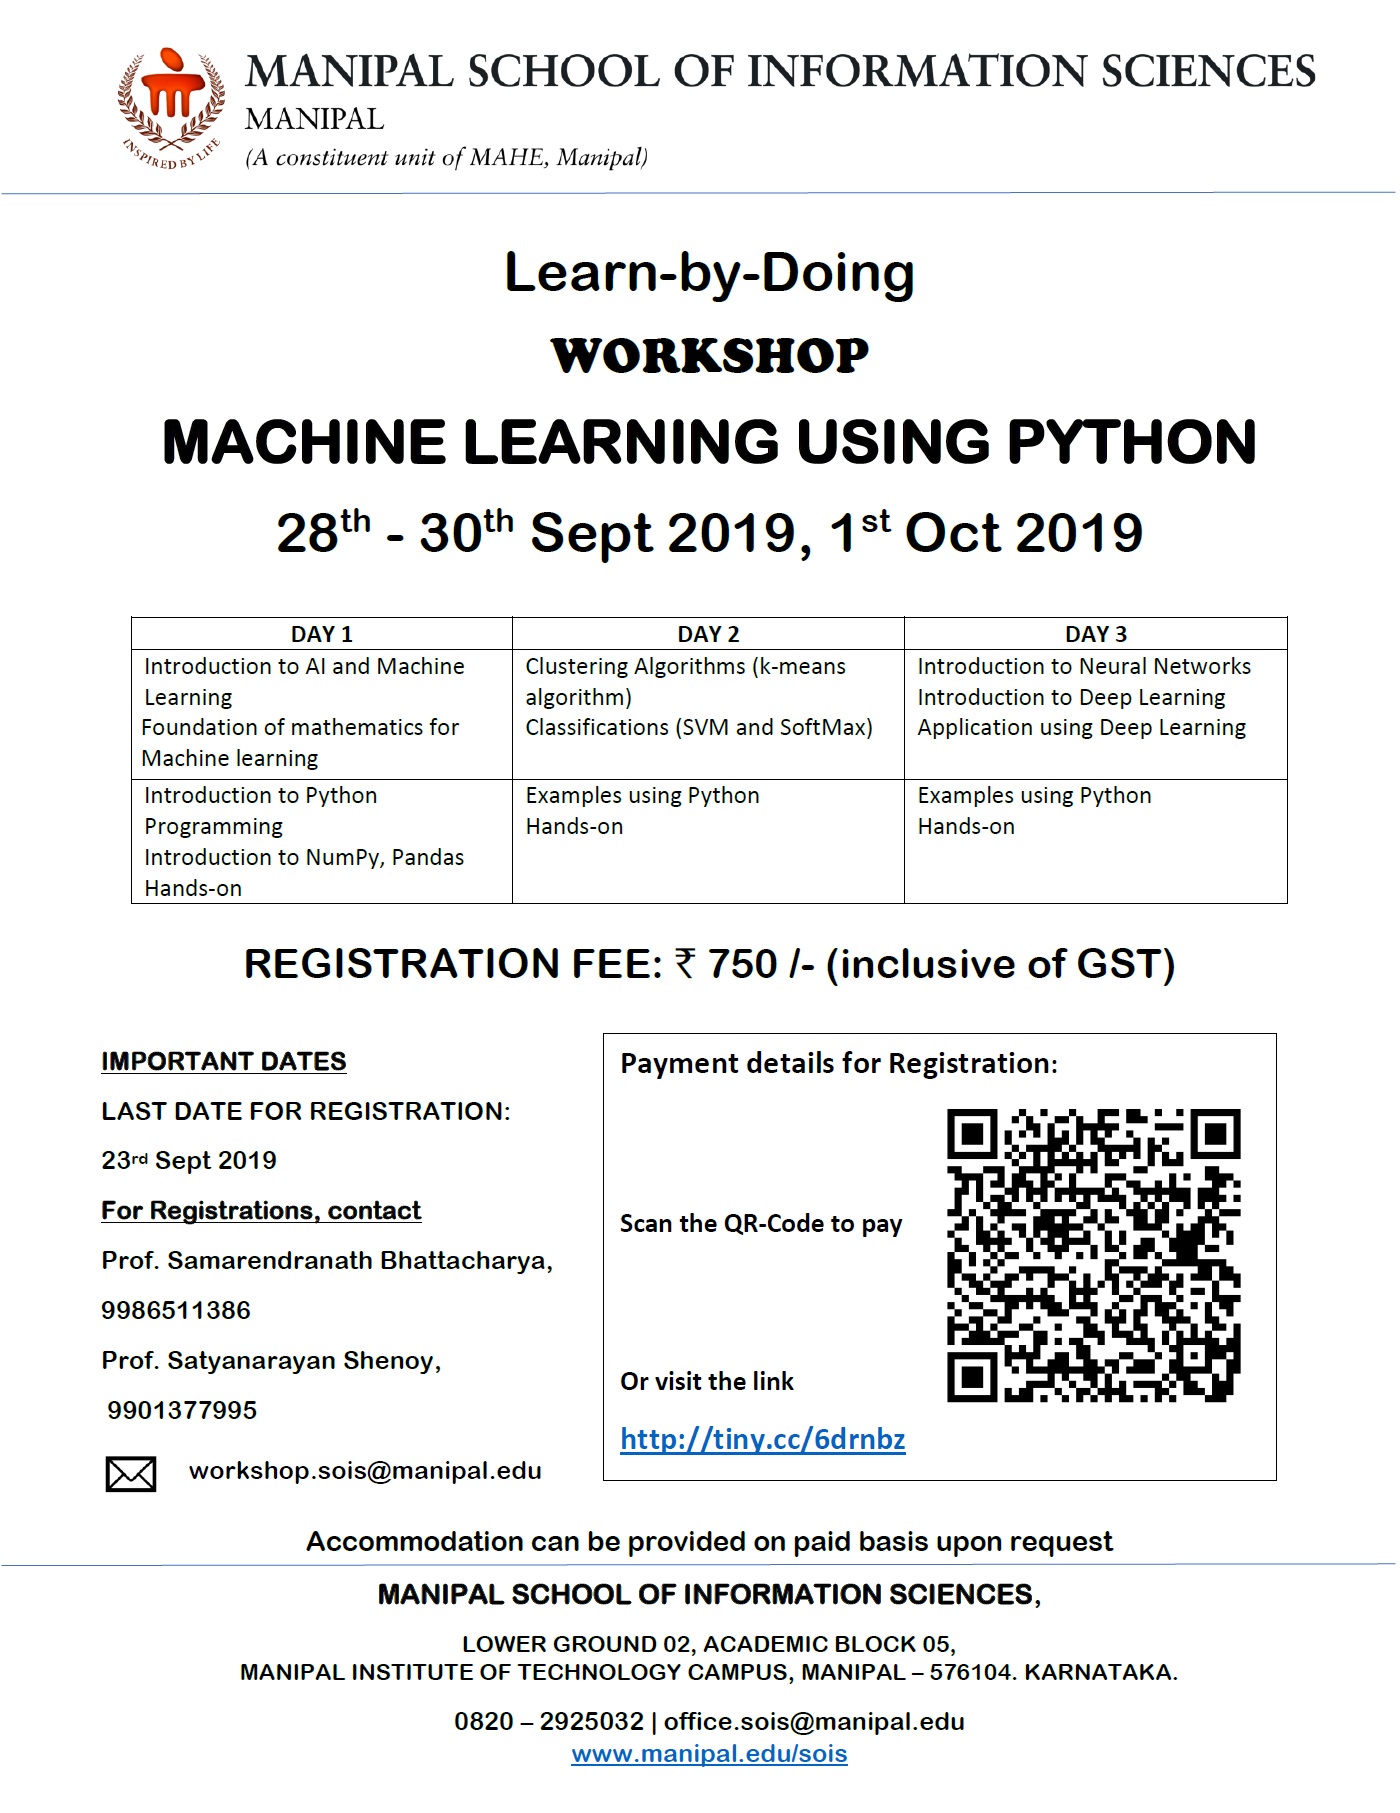 Machine Learning using Python Learn-by-Doing Workshop 2019